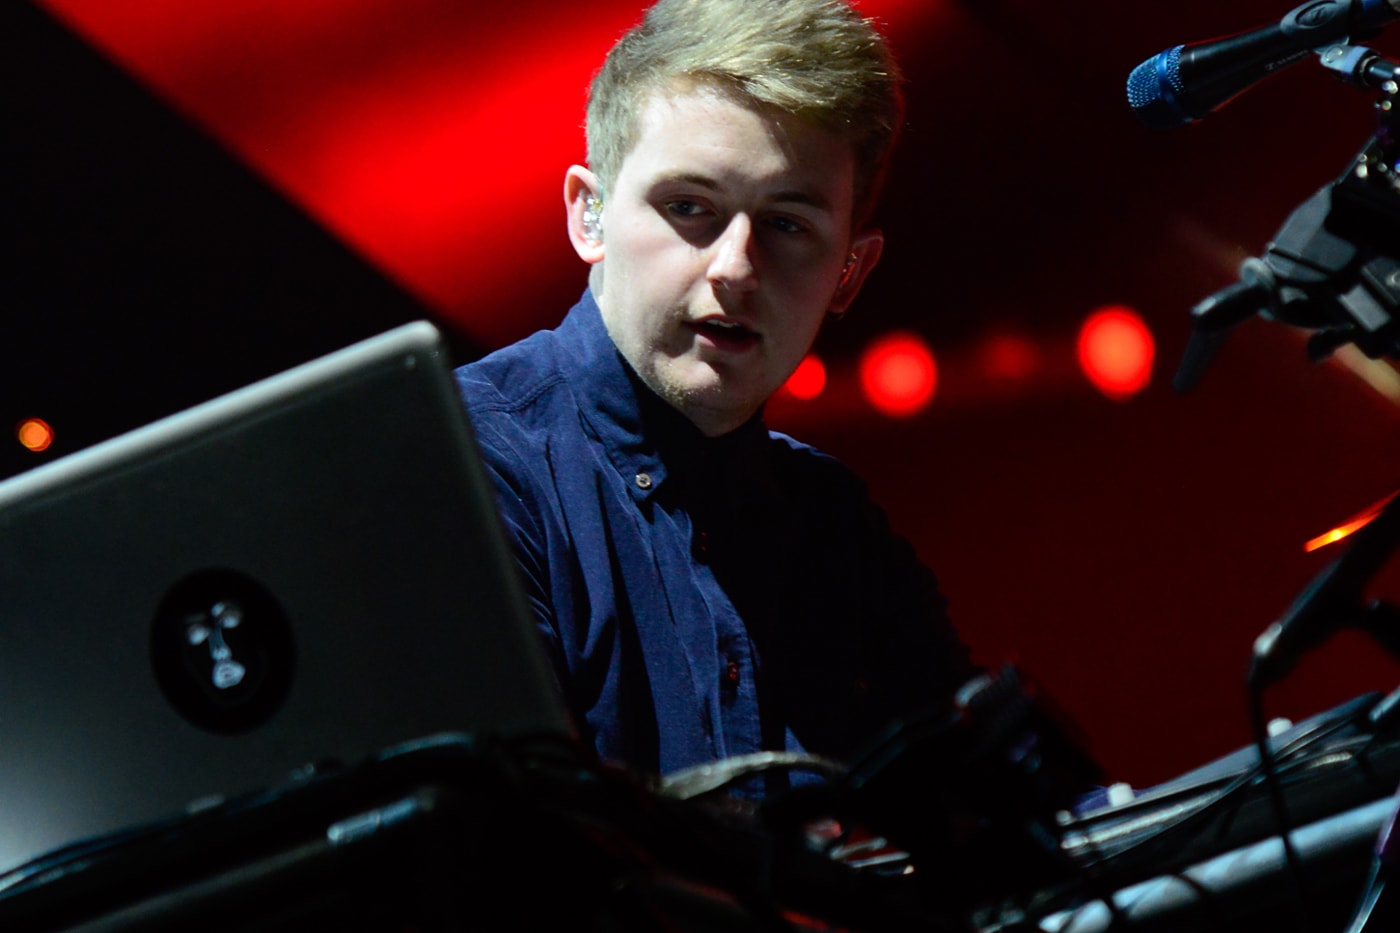 Listen to Disclosure and The Weeknd Nocturnal VIP Remix